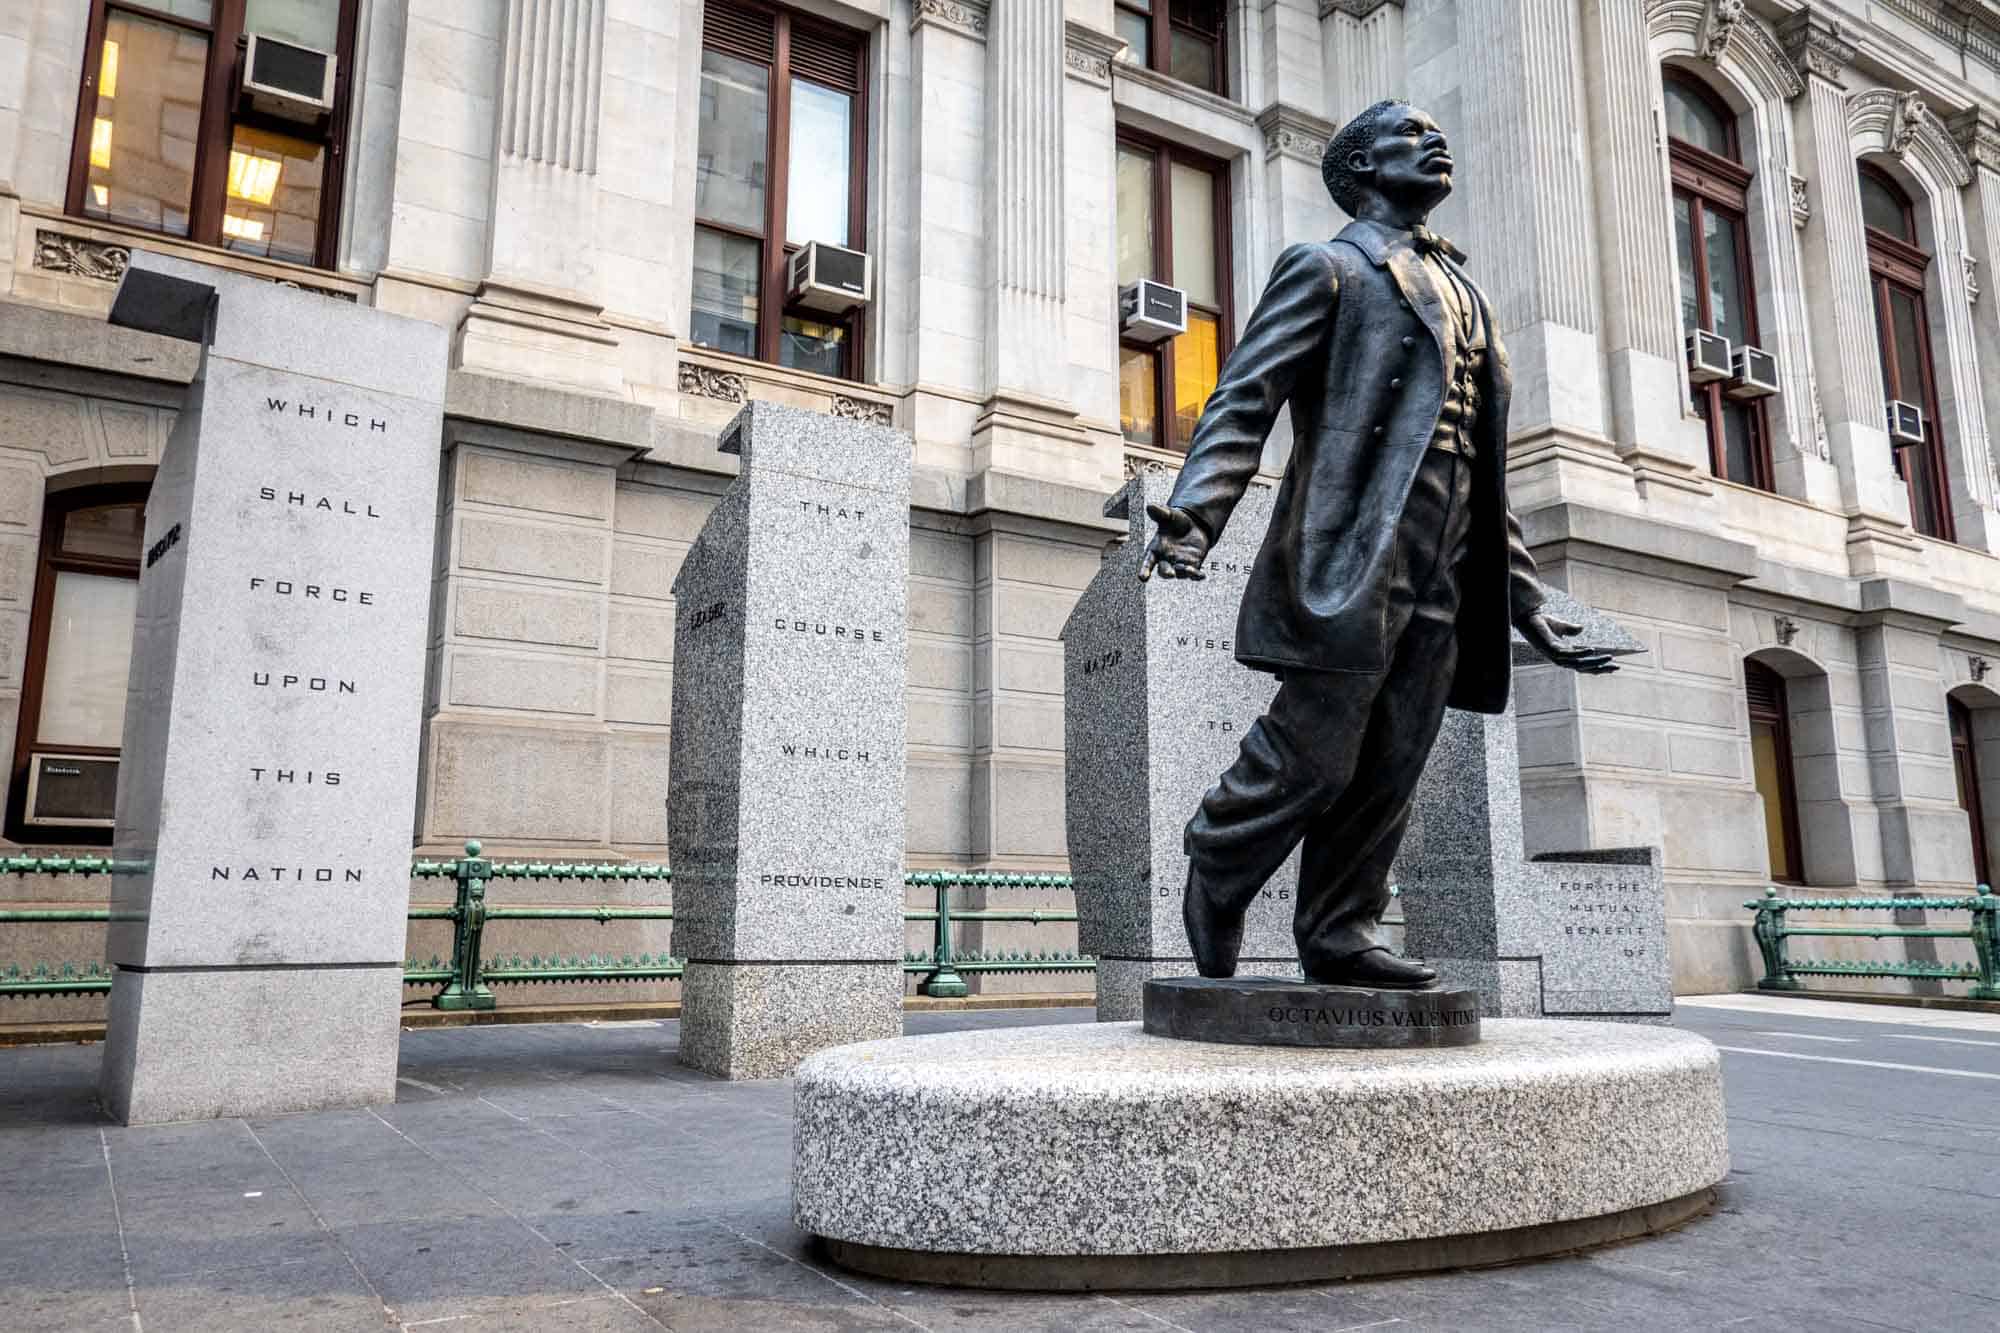 Bronze statue of a Black man in a 3-piece suite in front of four granite blocks